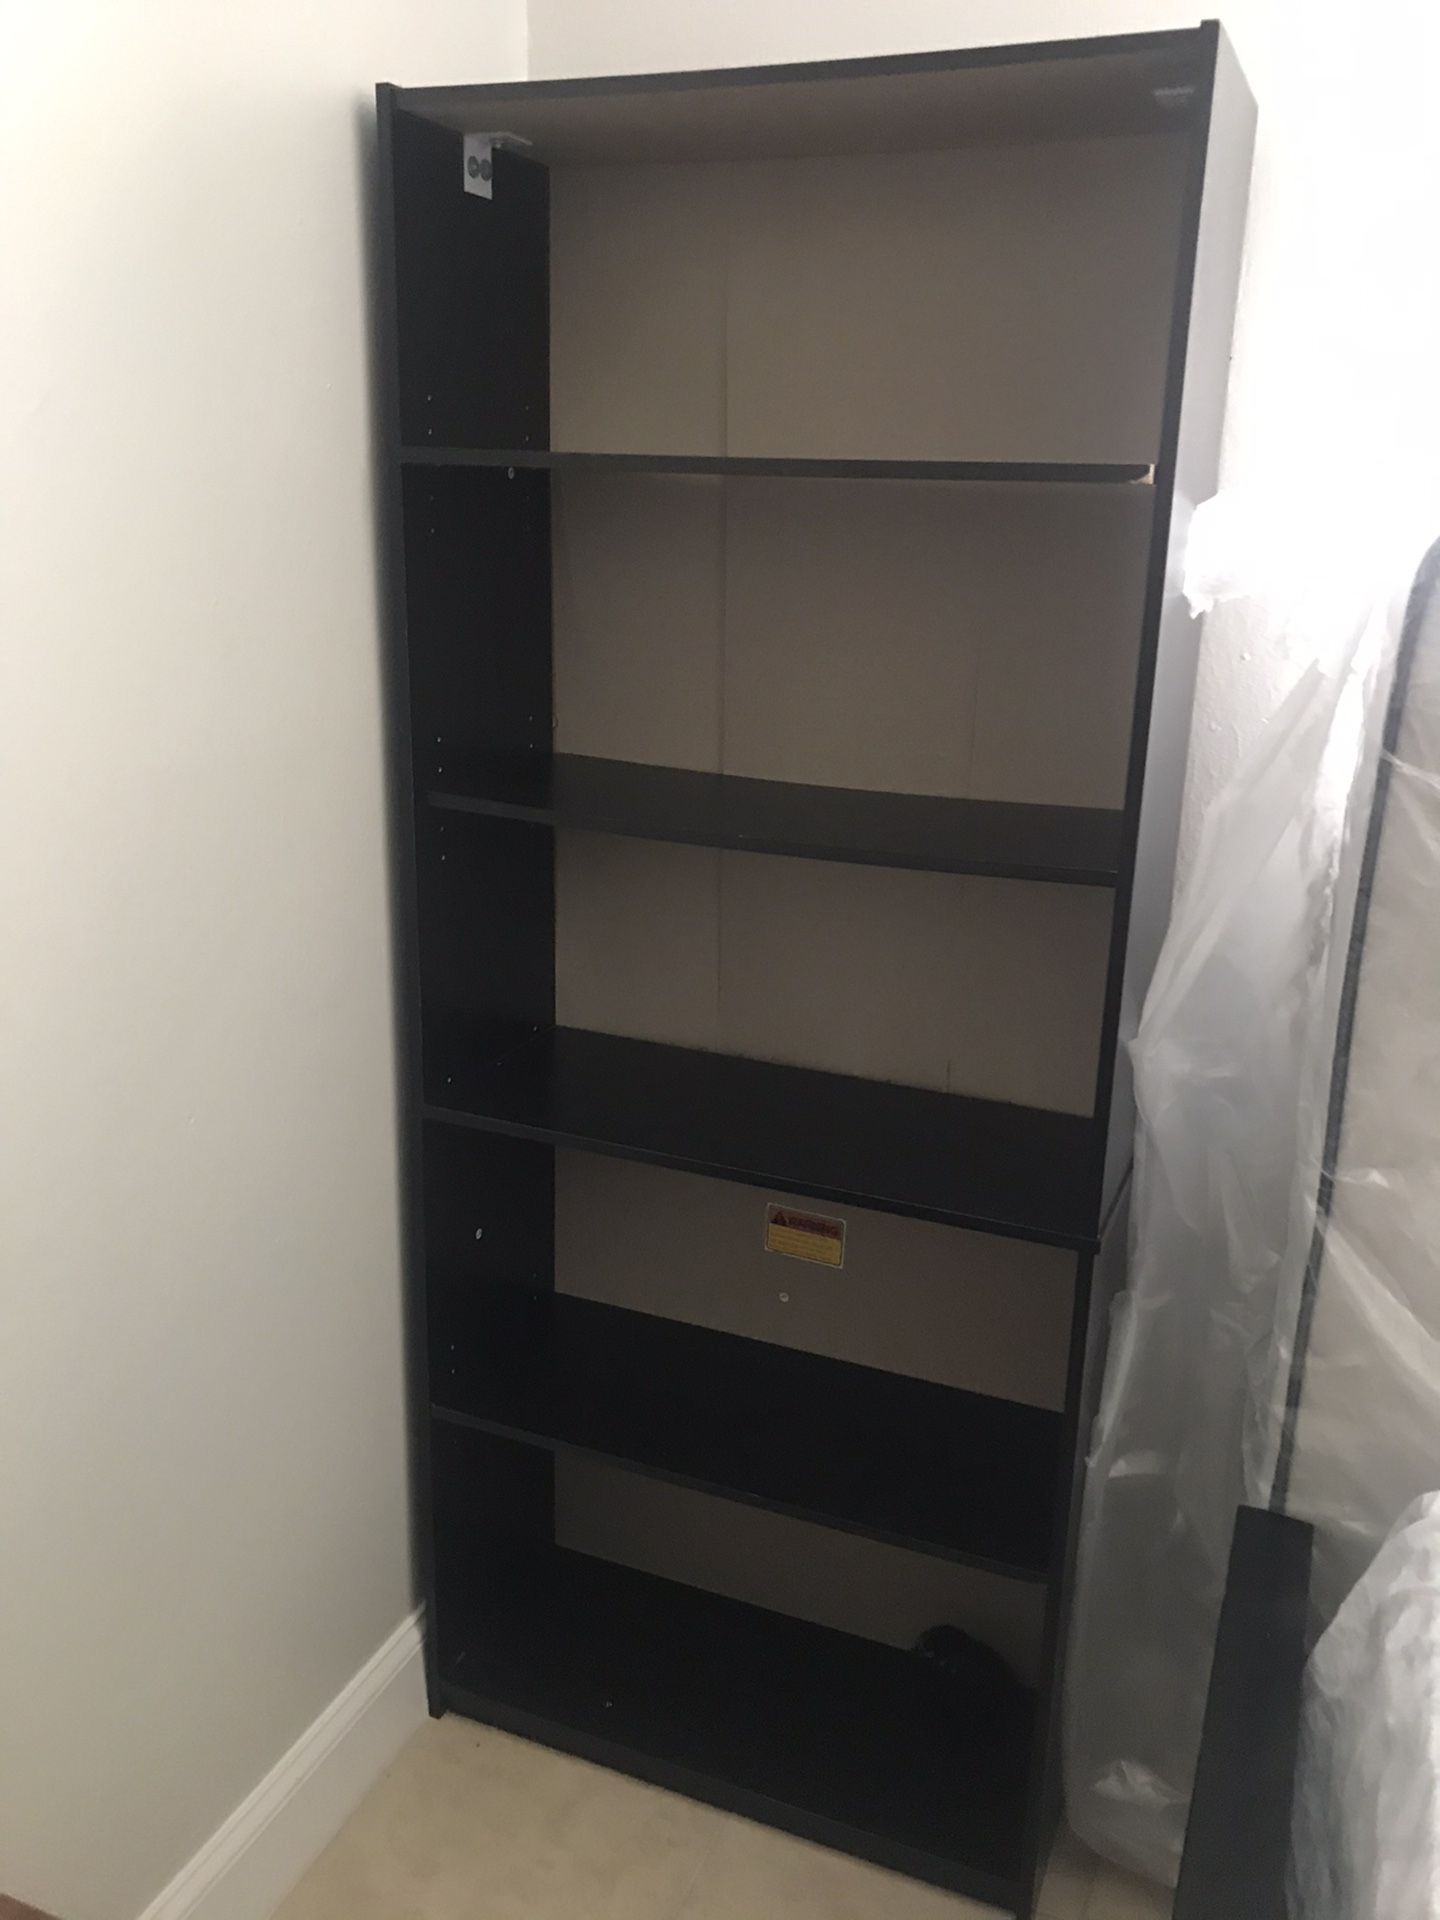 Three bookshelves one black and two wood colour $15 each or $30 for three of them